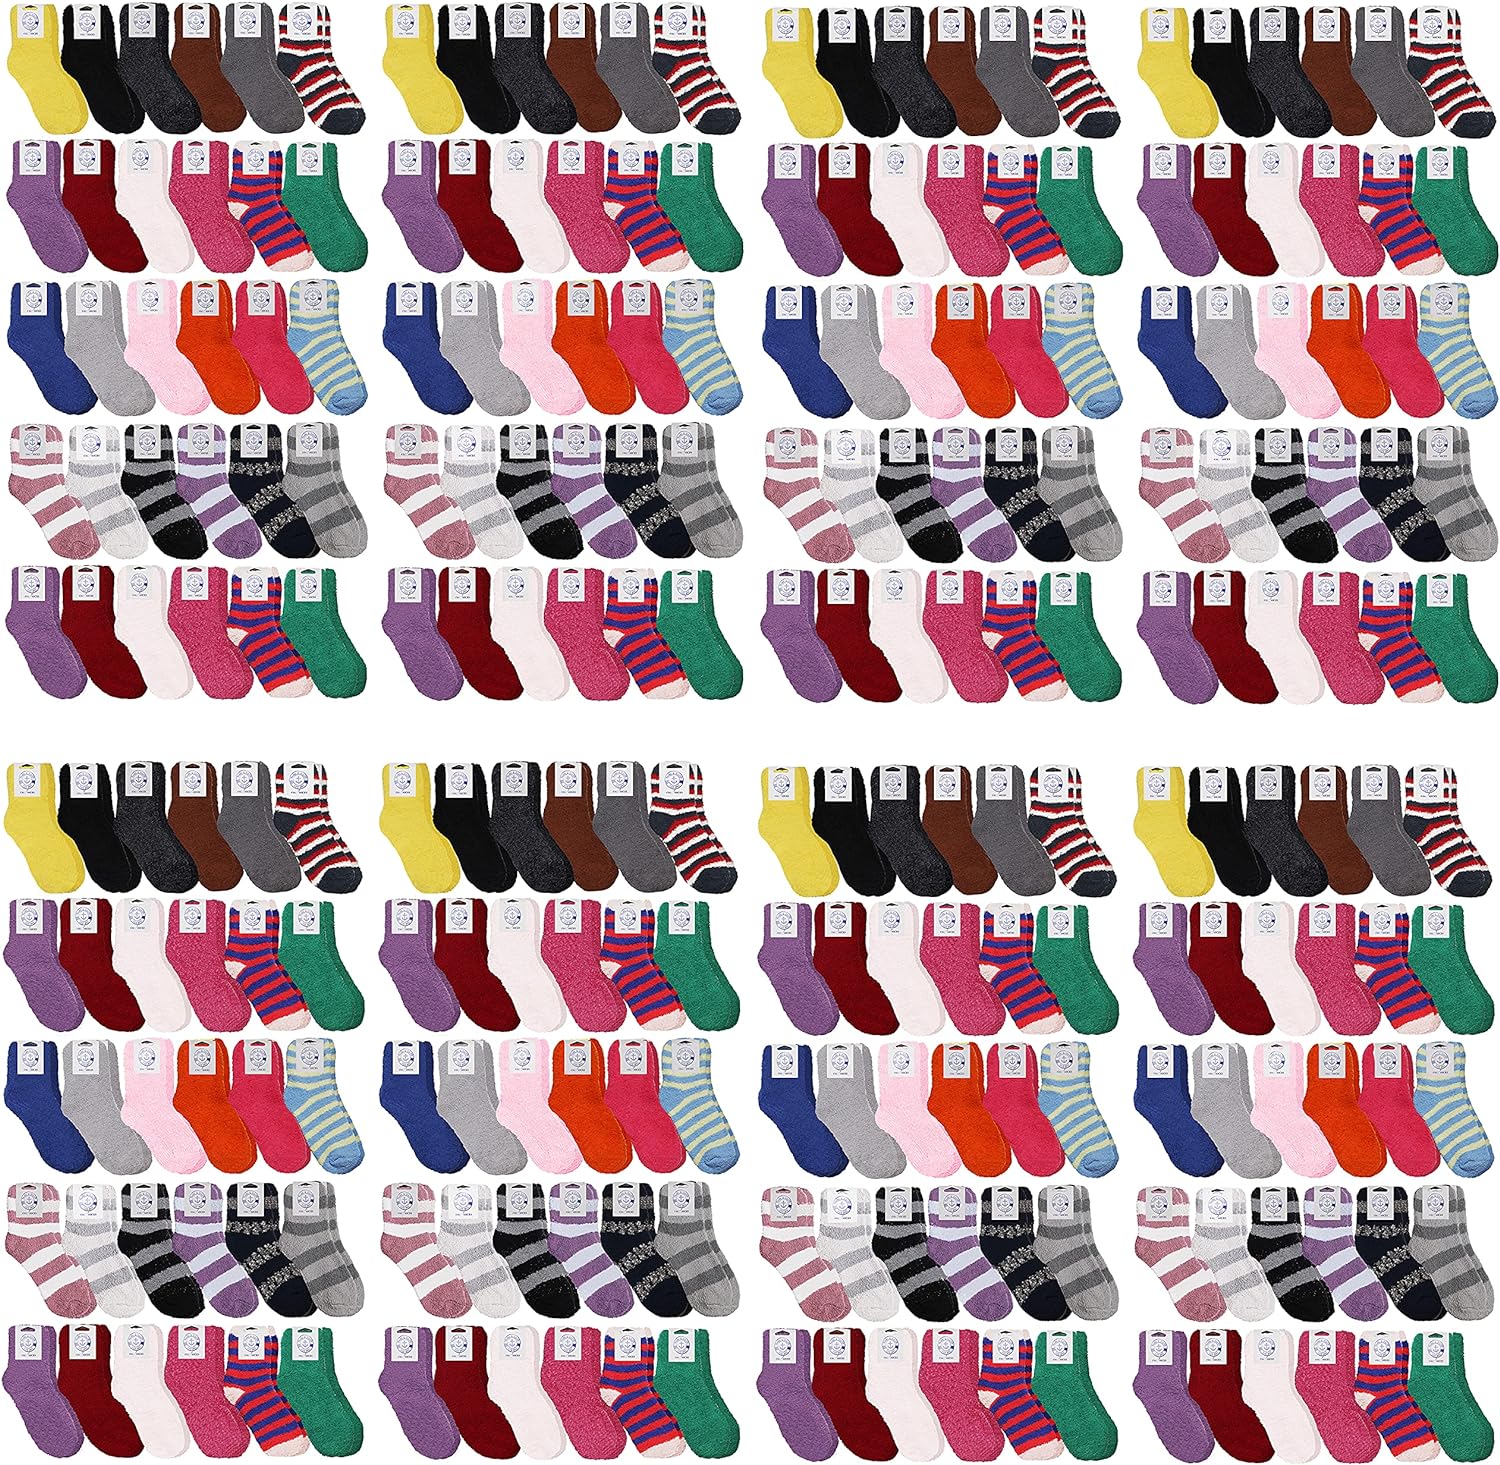 Wholesale Sock Deals 120 Pairs Case Of WSD Womens Fuzzy Socks, Winter Soft Fluffy Assorted Socks Size, 9-11